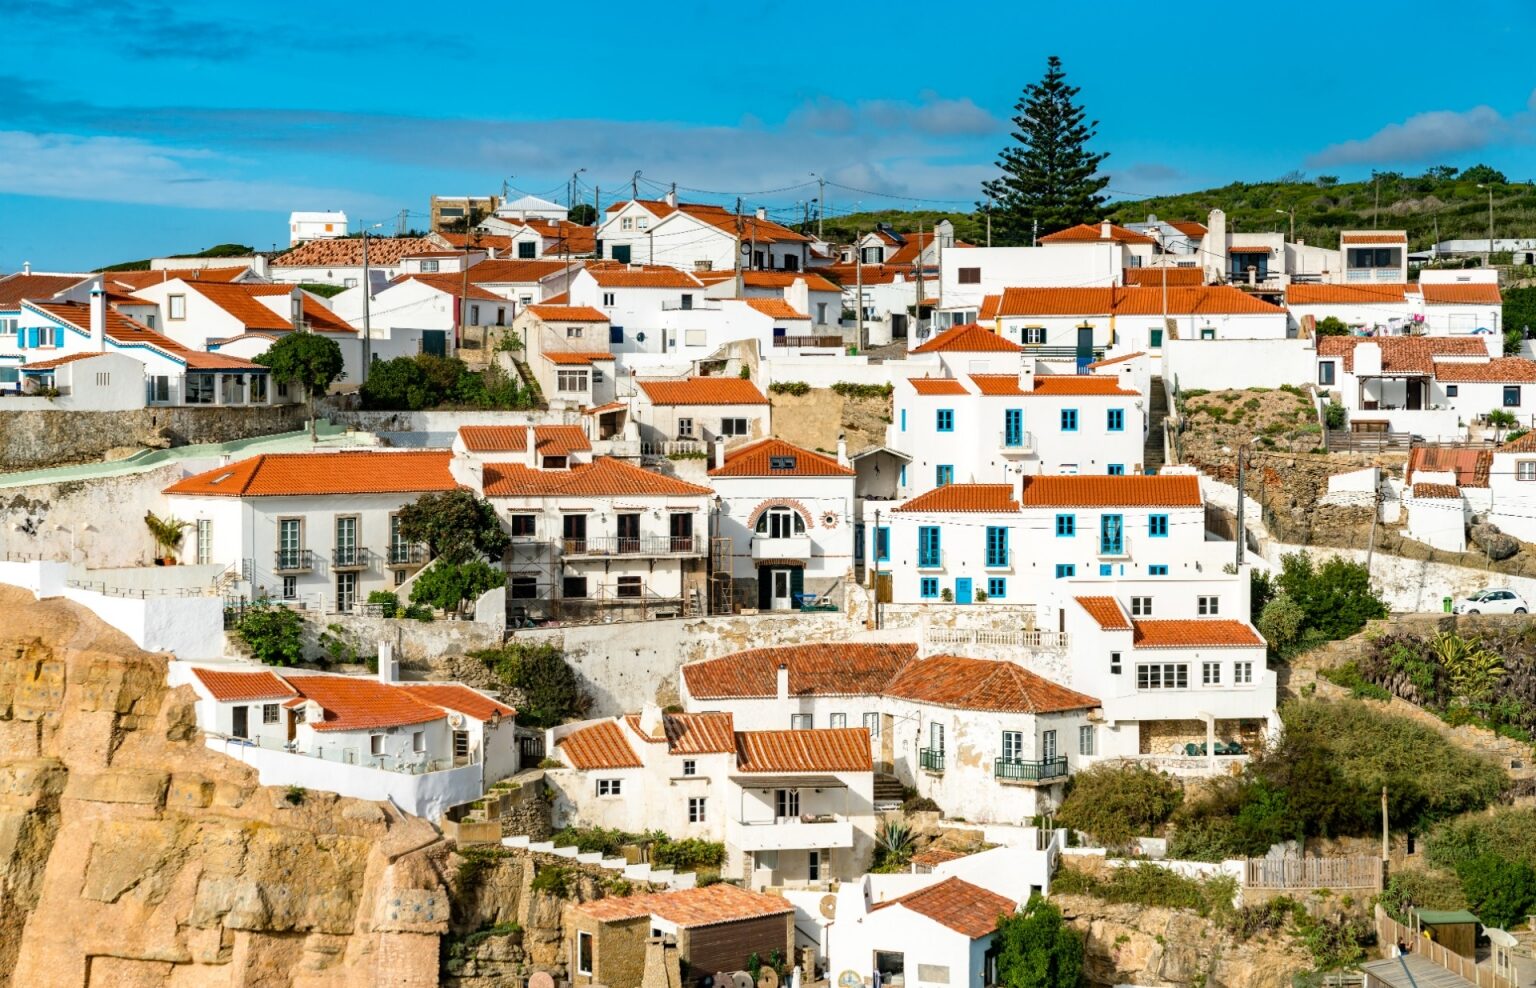 10 Best Beach Towns in Portugal | Celebrity Cruises